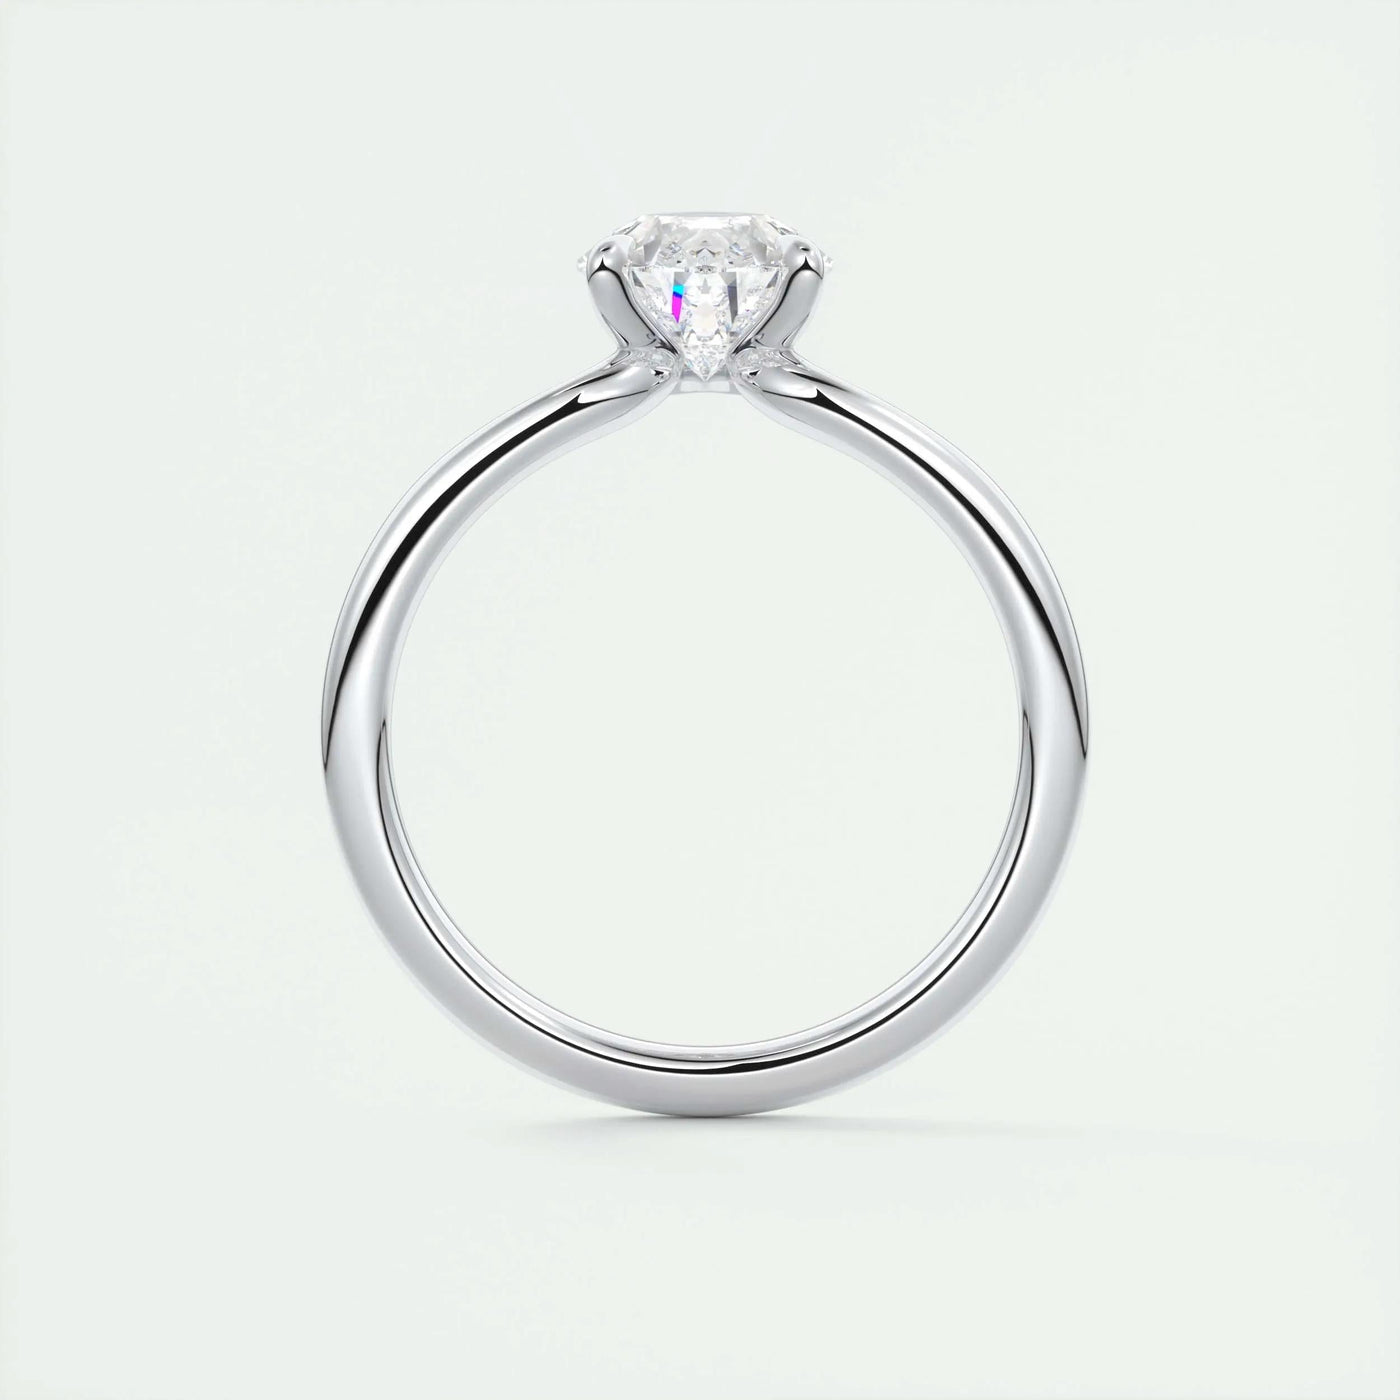 1.93CT Pear Cut Solitaire Moissanite Diamond Engagement Ring